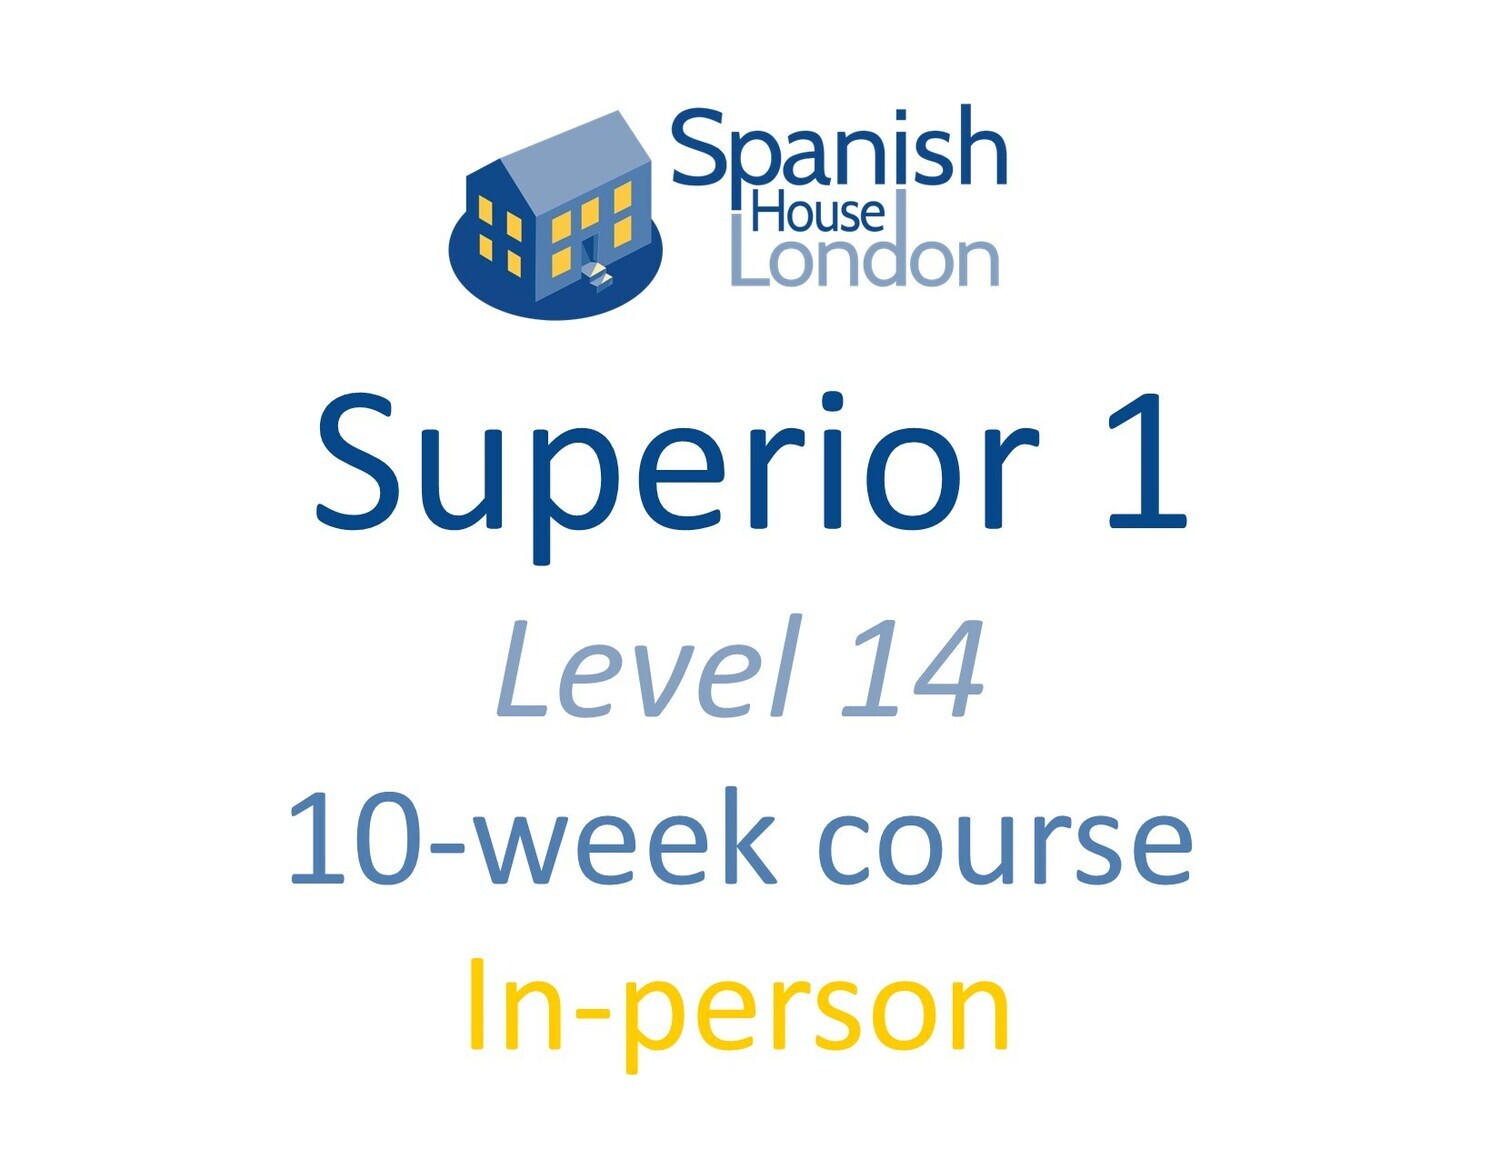 Superior 1 Course starting on 30th June at 6pm in Clapham North